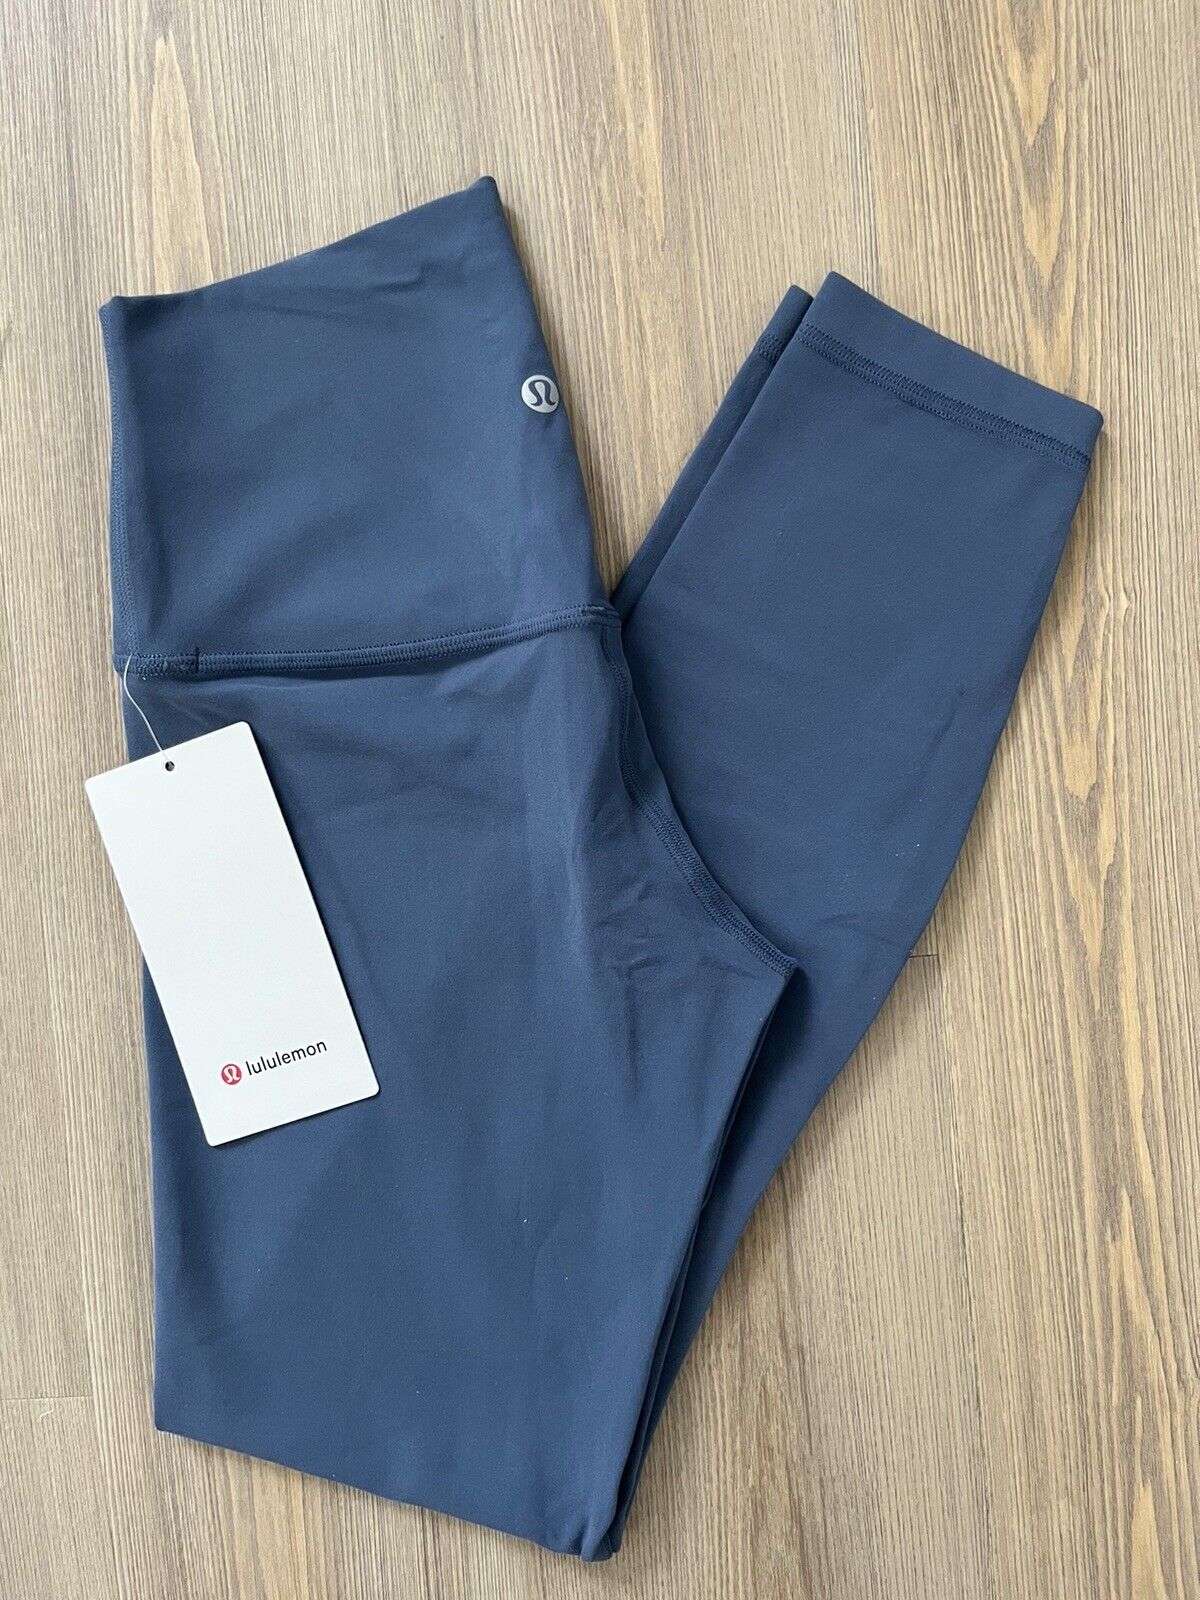 🦄NWT Lululemon Align Pant Size 4 Ink Blue 25” Limited Release RARE!